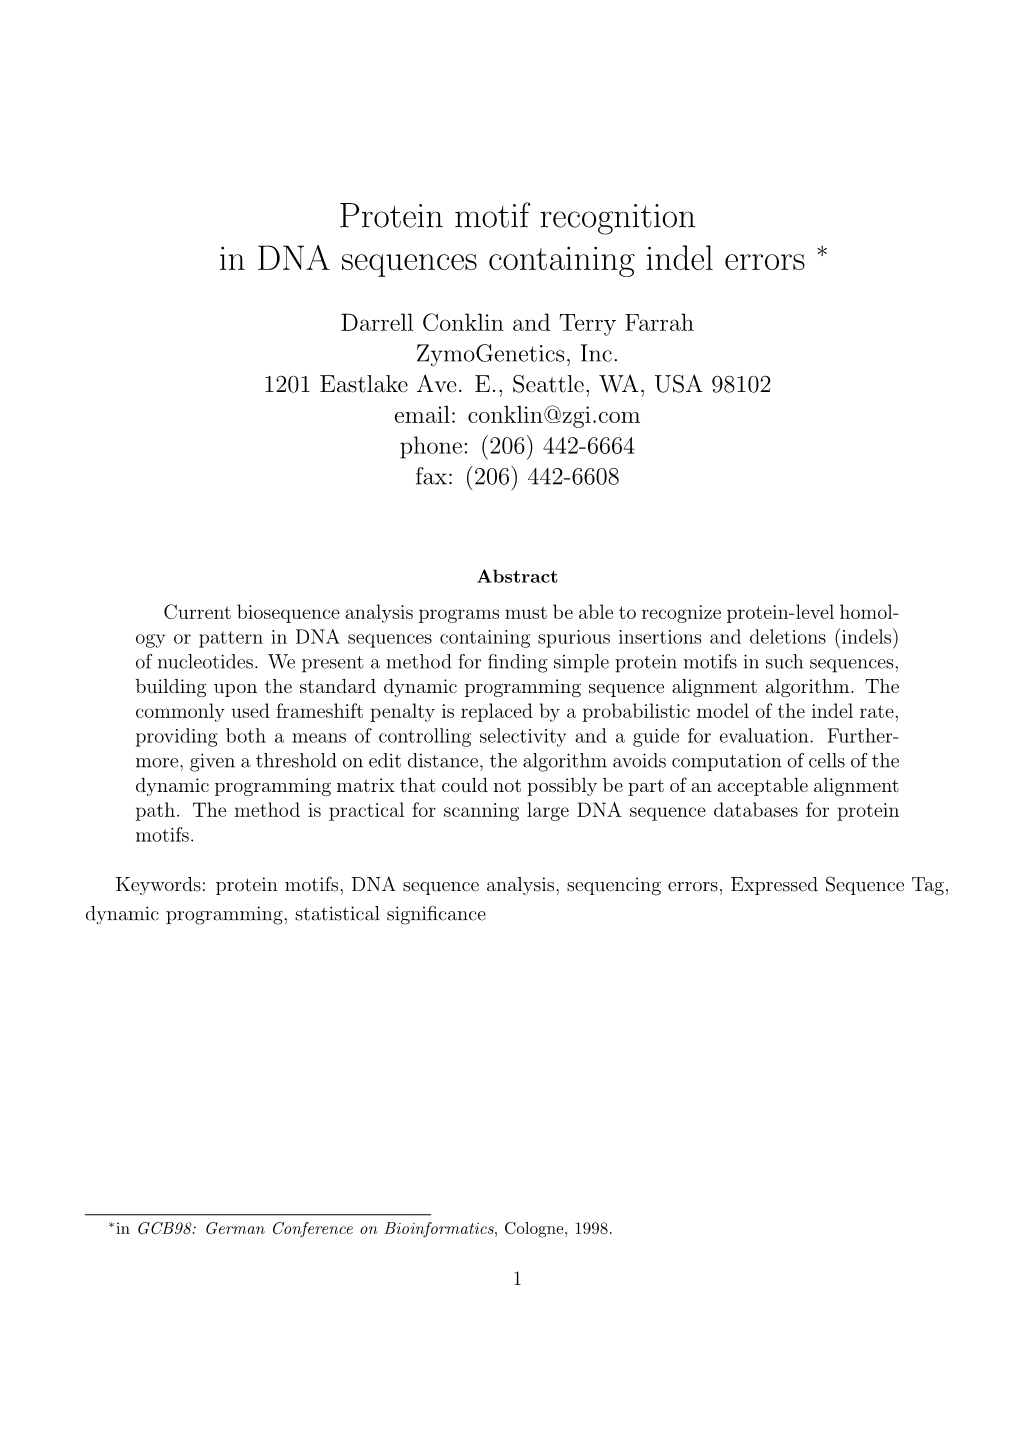 Protein Motif Recognition in DNA Sequences Containing Indel Errors ∗